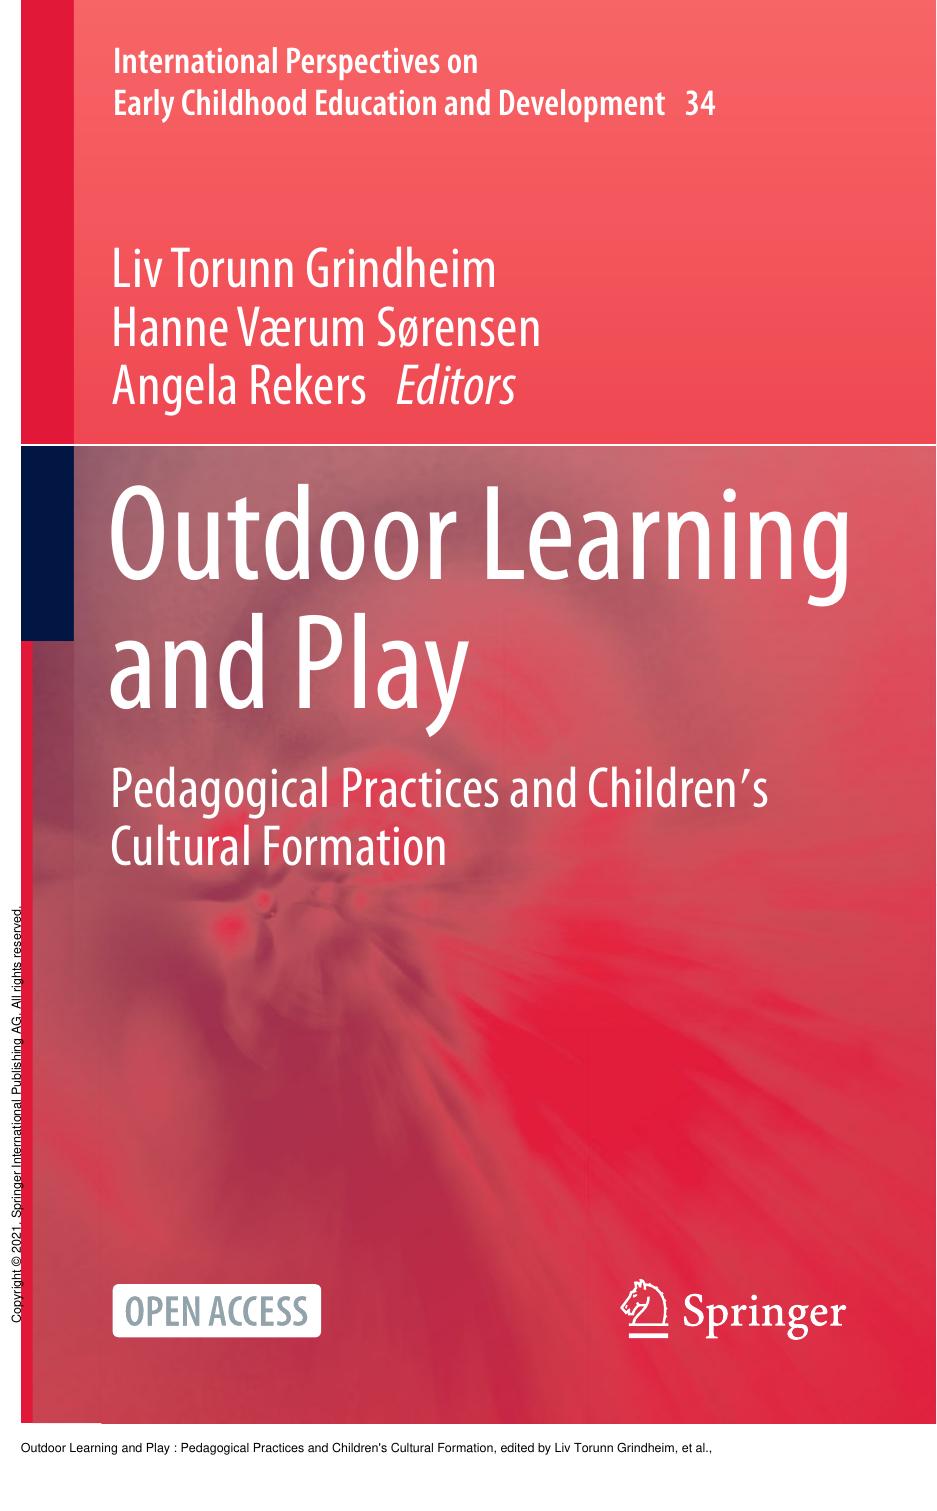 Outdoor Learning and Play : Pedagogical Practices and Children's Cultural Formation by Liv Torunn Grindheim; Hanne Værum Sørensen; Angela Rekers